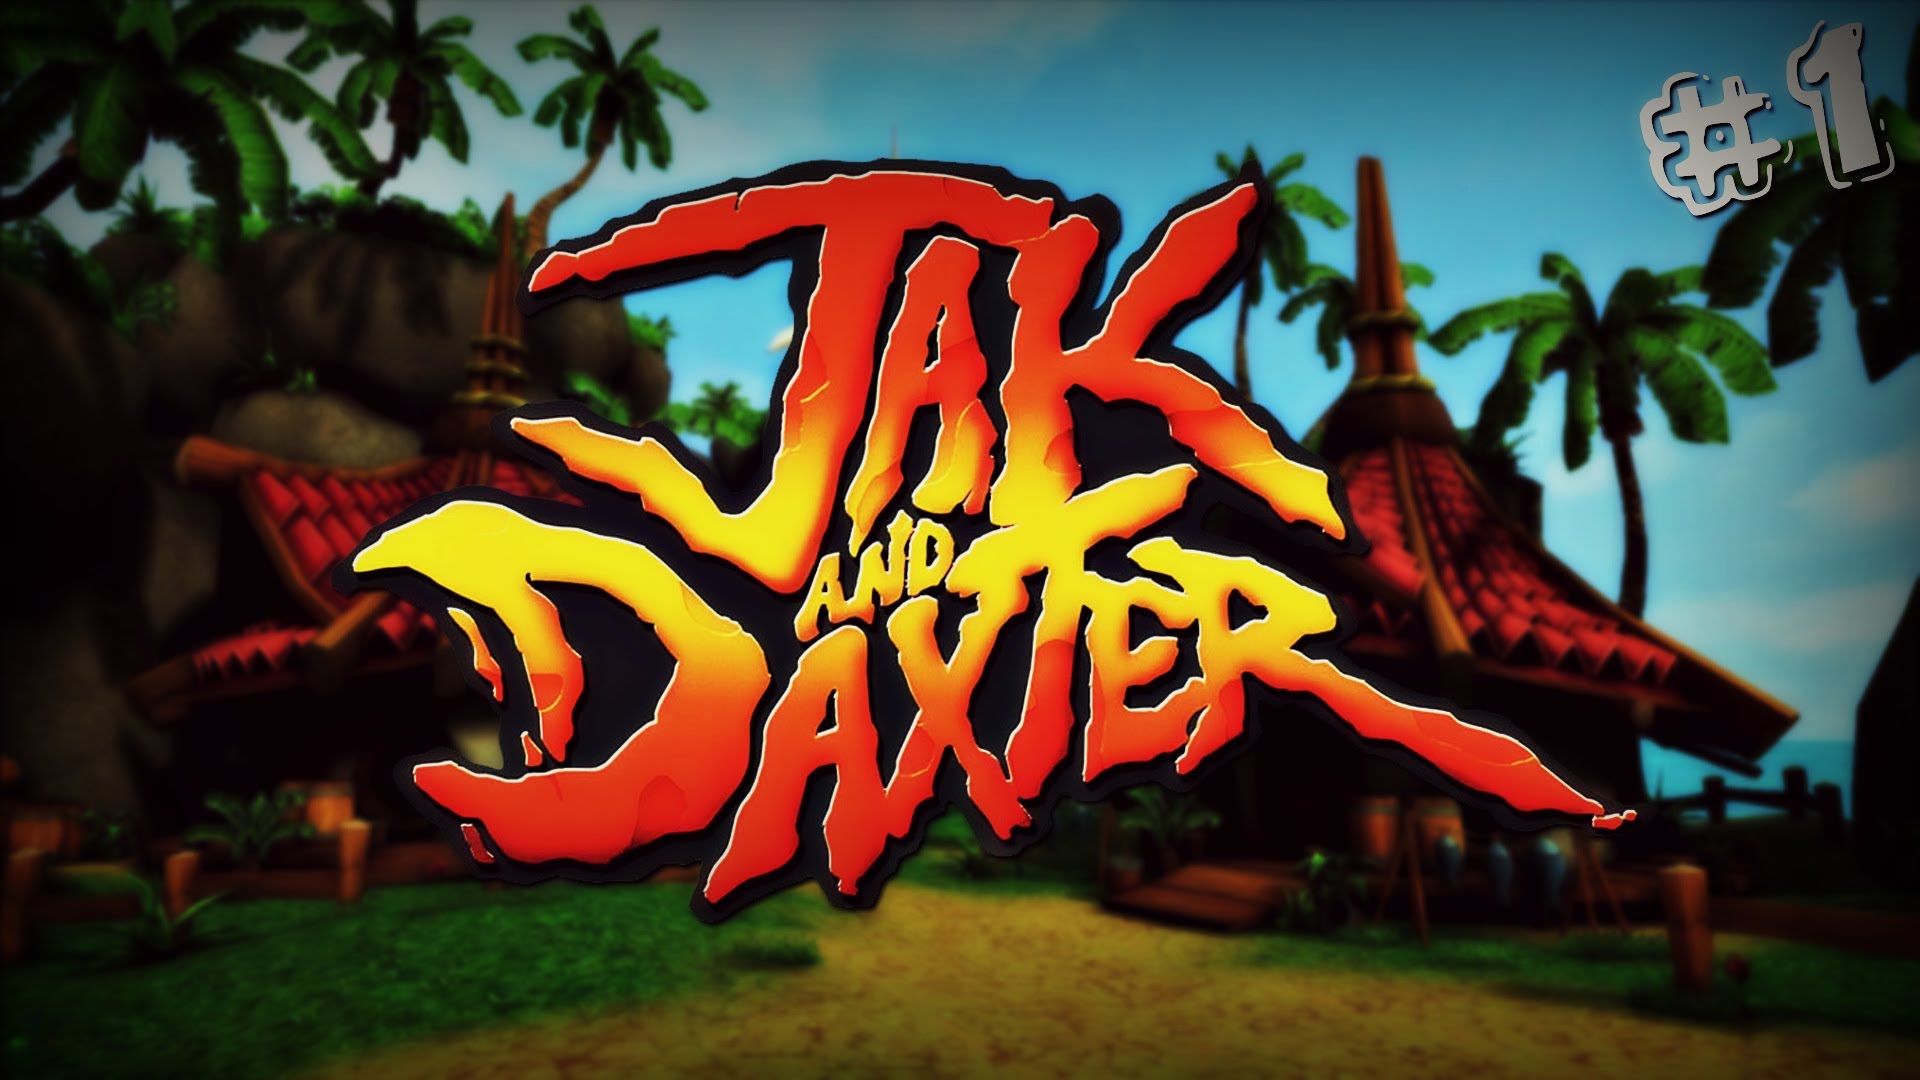 Video Game Jak and Daxter: The Precursor Legacy HD Wallpaper | Background Image